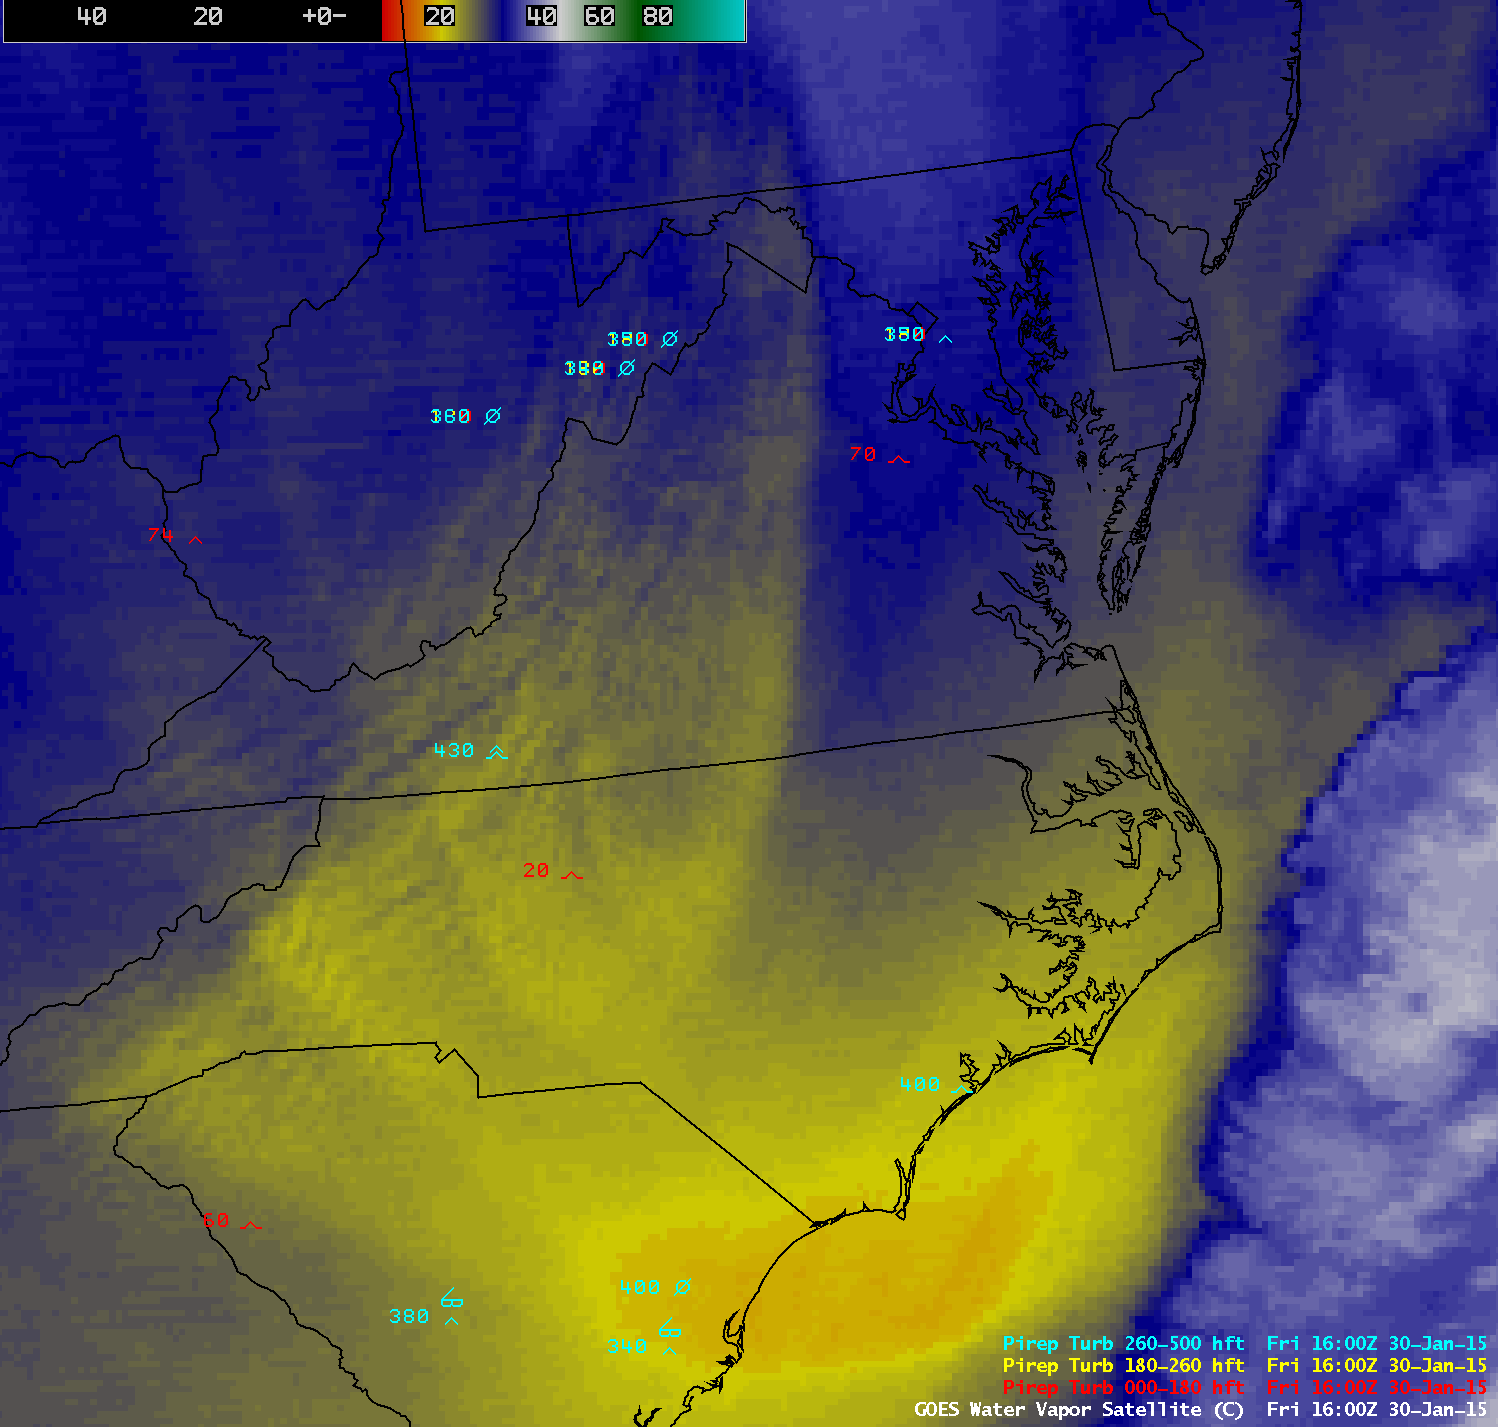 GOES-13 6.5 µm water vapor channel images (click to play animation)